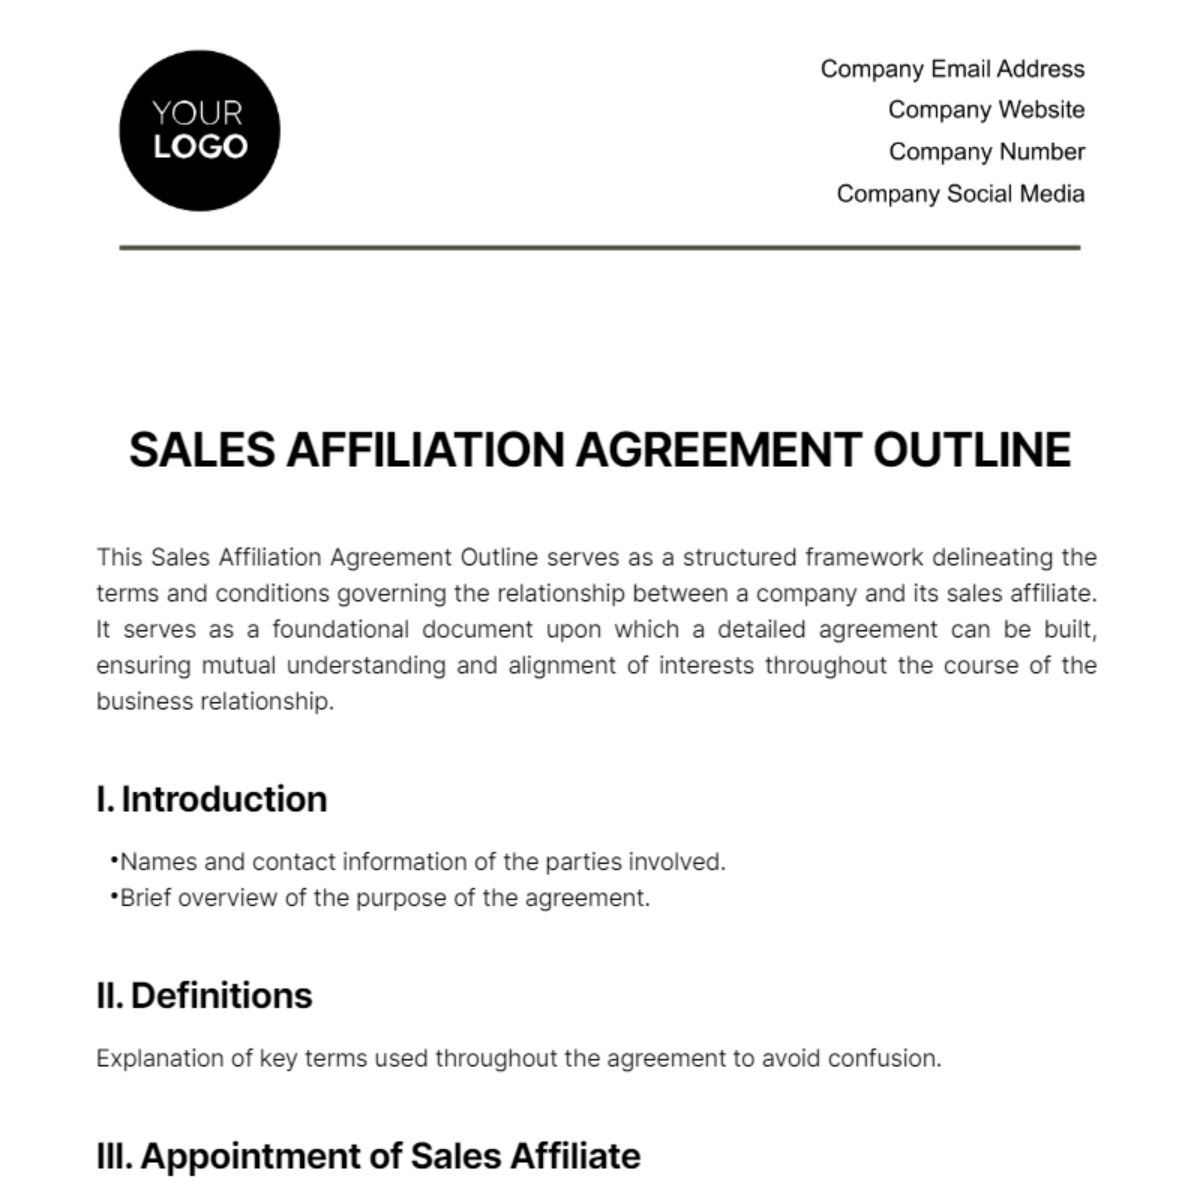 Free Sales Affiliation Agreement Outline Template